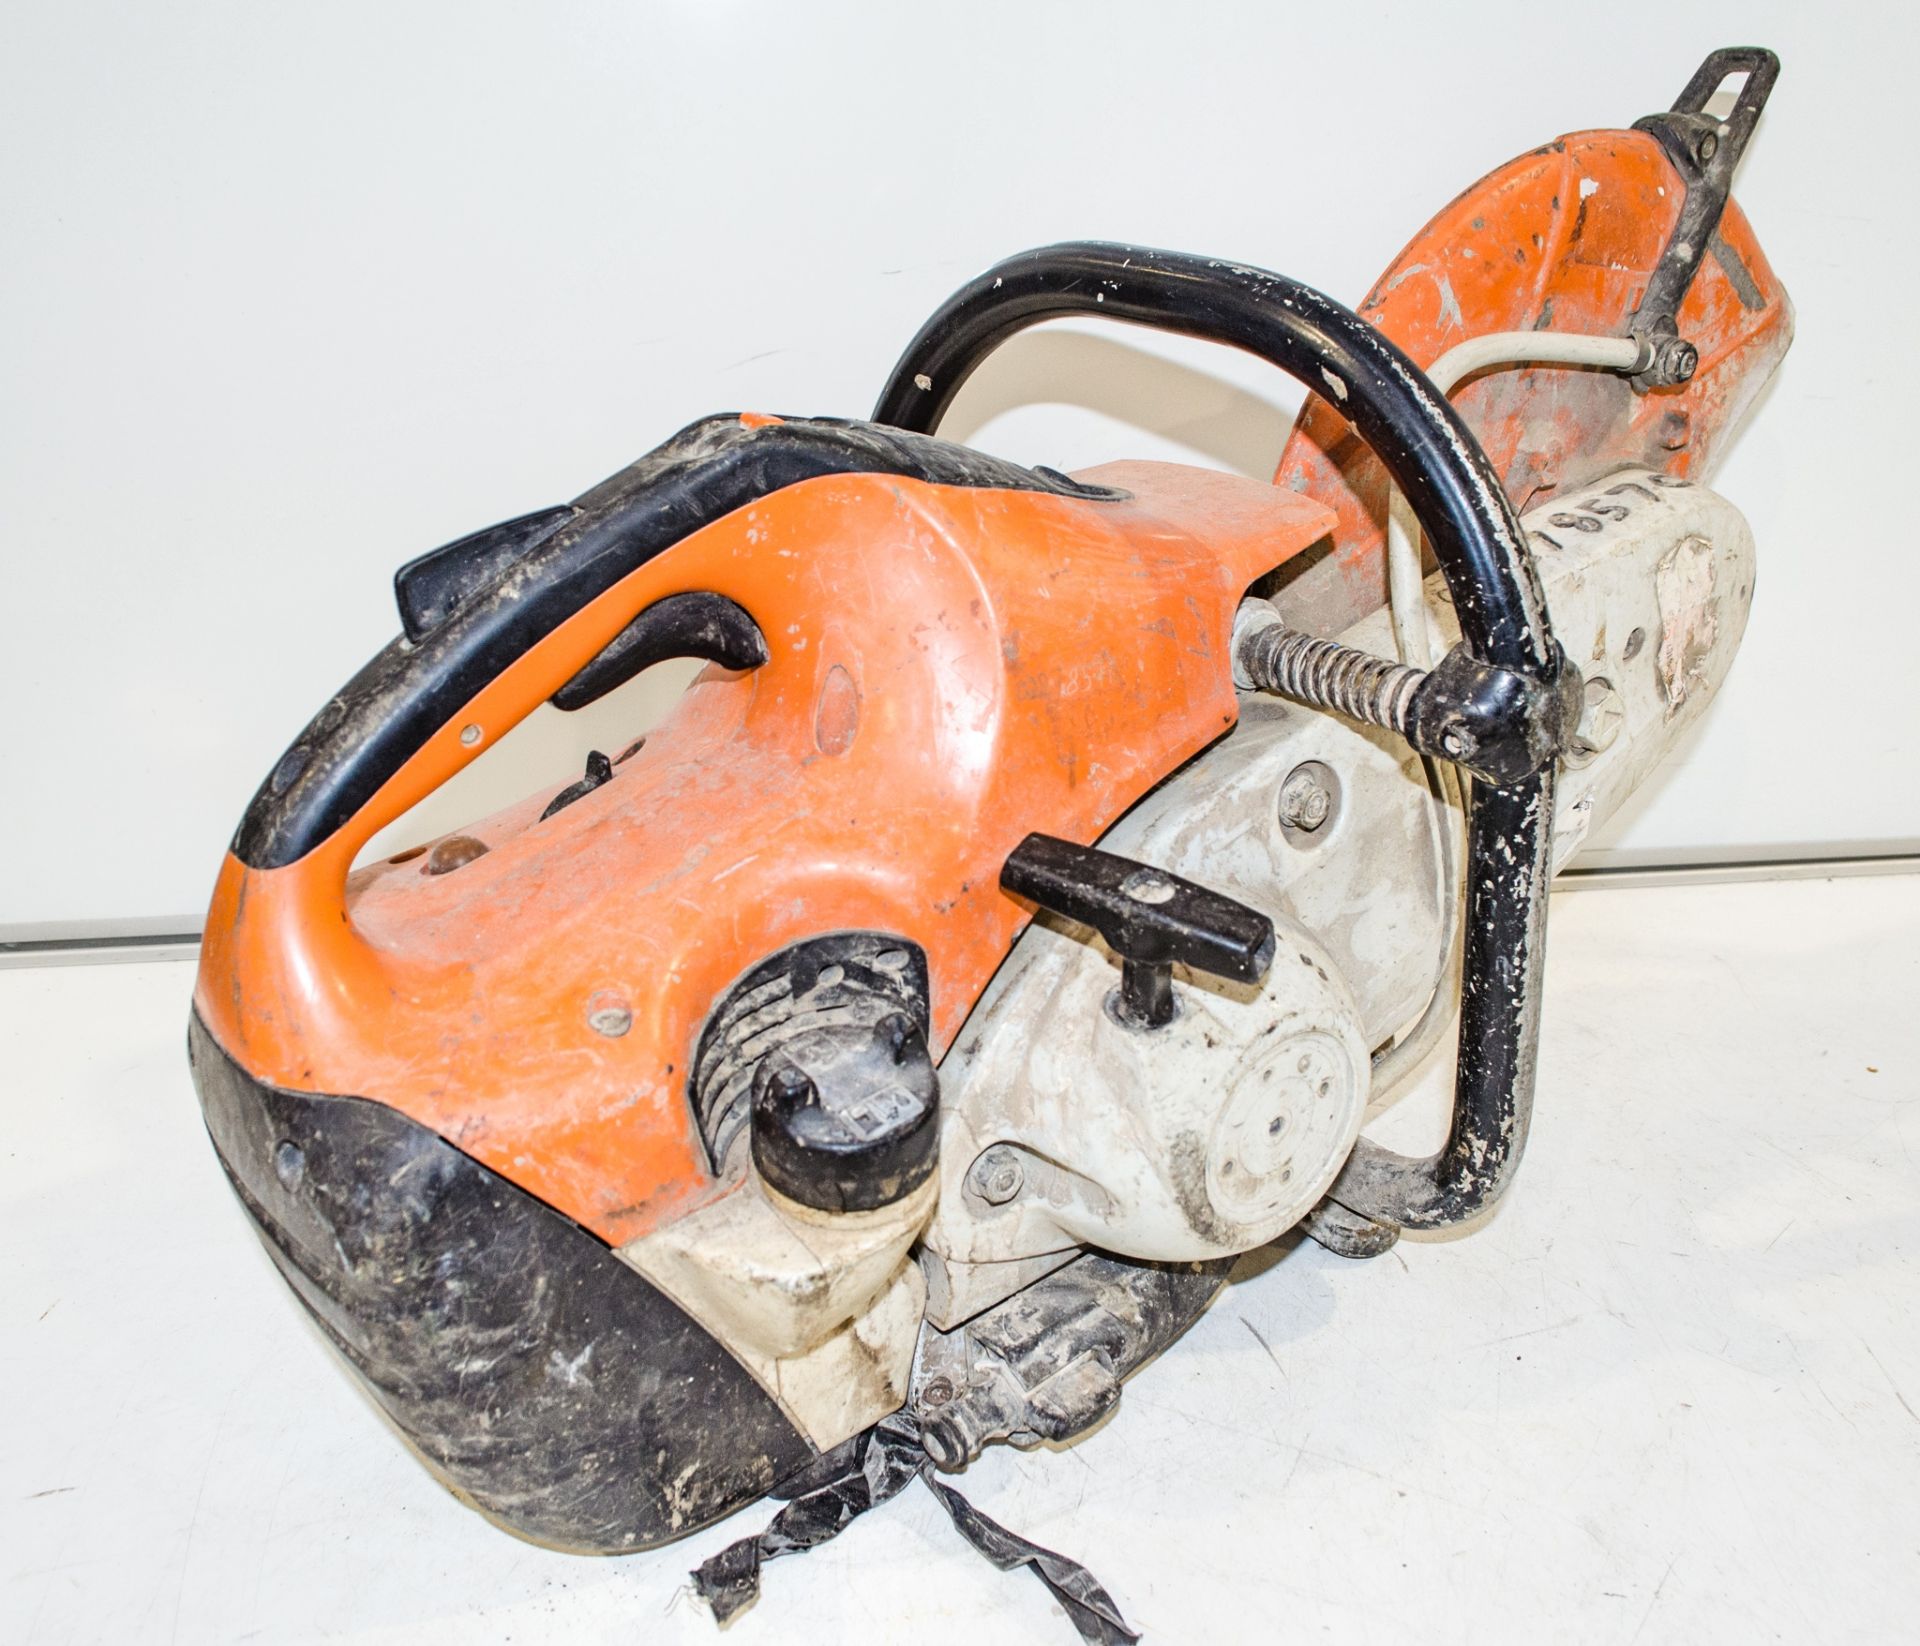 Stihl TS410 petrol driven cut off saw 02278570 ** Engine parts missing ** CO - Image 2 of 3